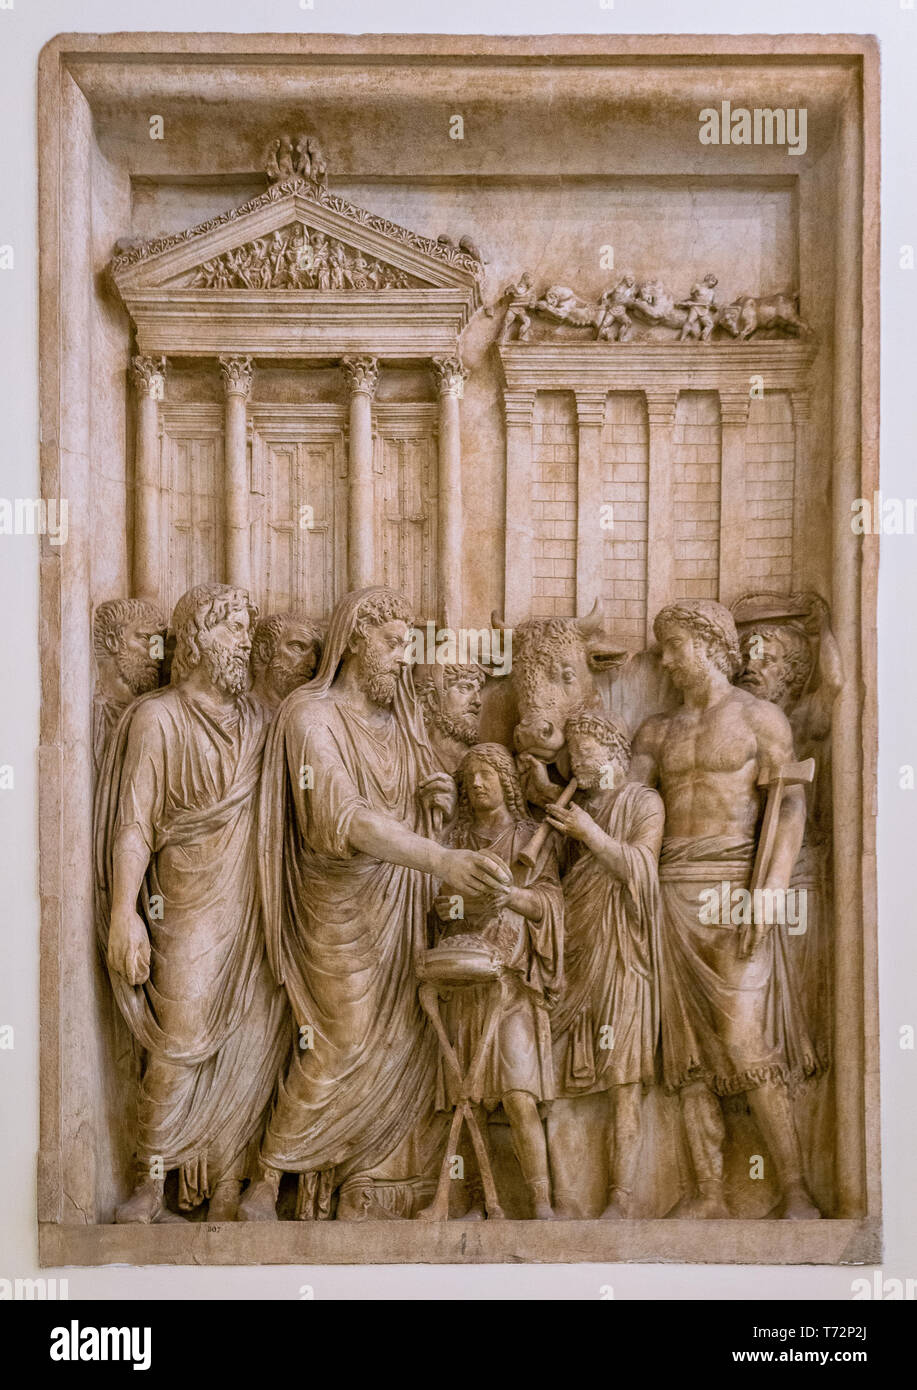 Bas relief in the Capitoline Museums in Rome, Italy Stock Photo